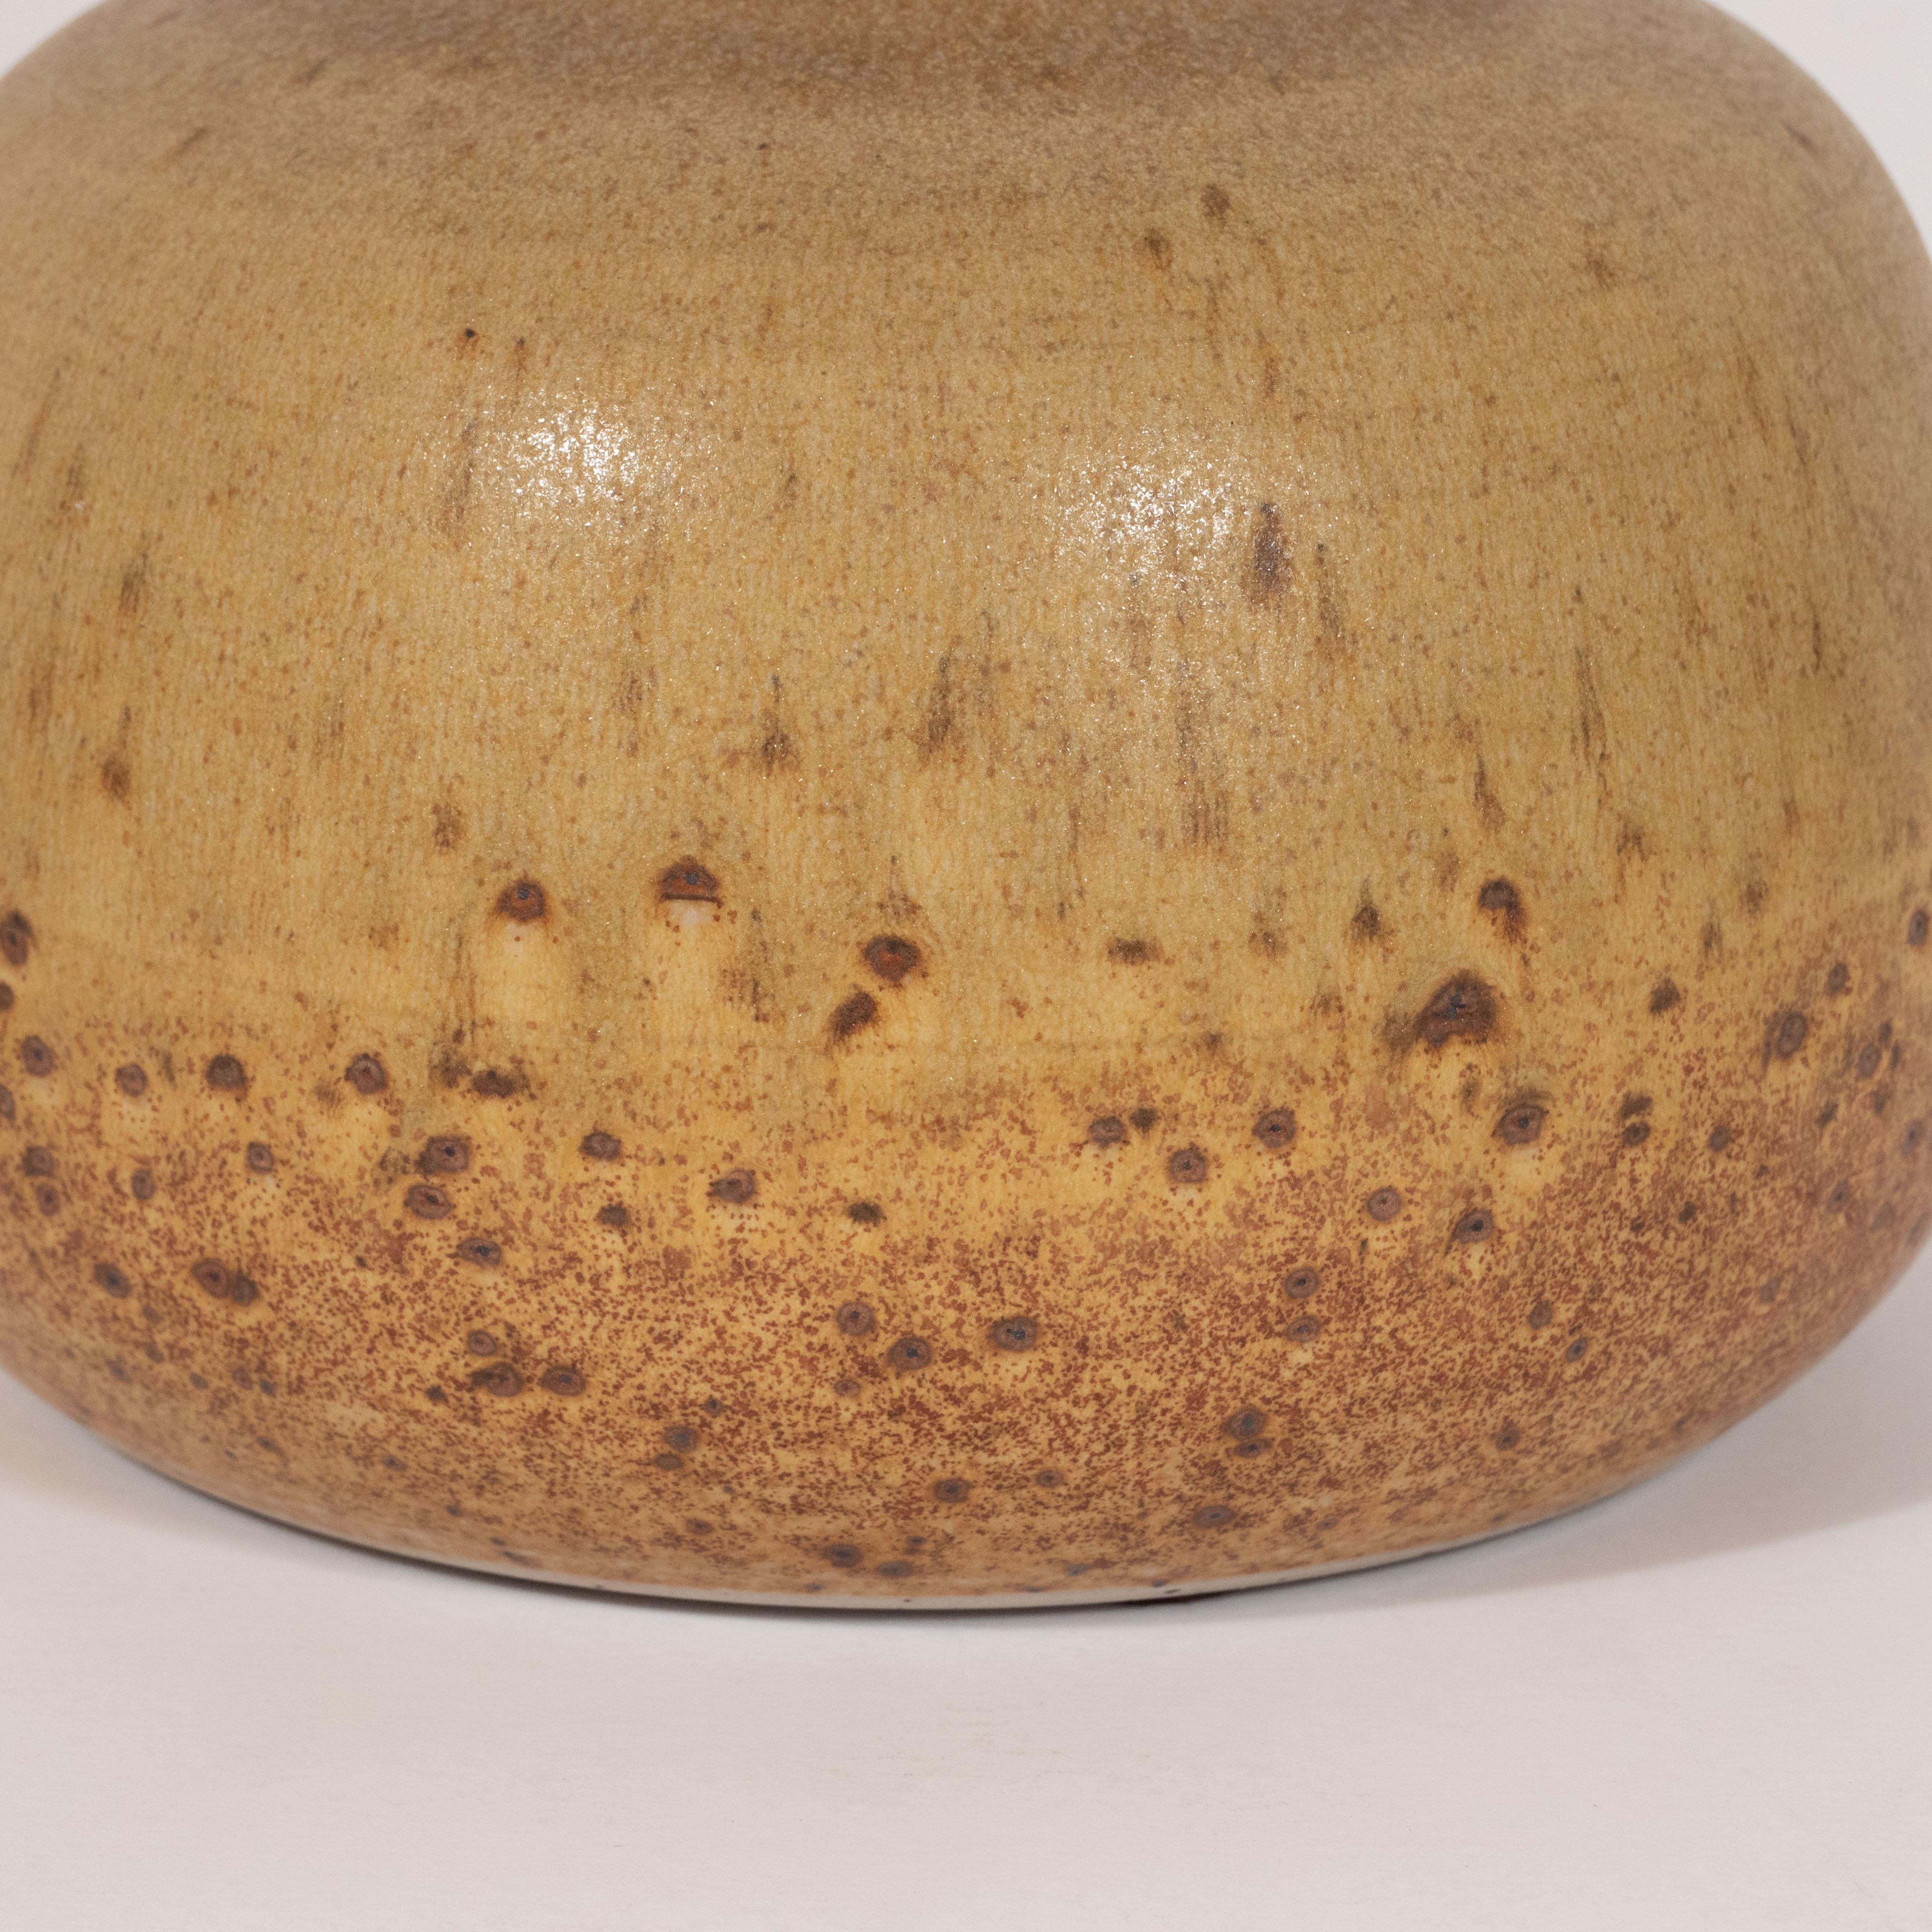 This elegant Mid-Century Modern decorative vase was realized in Denmark by the esteemed ceramic atelier of the period Per Linneman Schmidt for Palschus, circa 1960. It features a rounded body with a tapered neck and a circular mouth in a deep